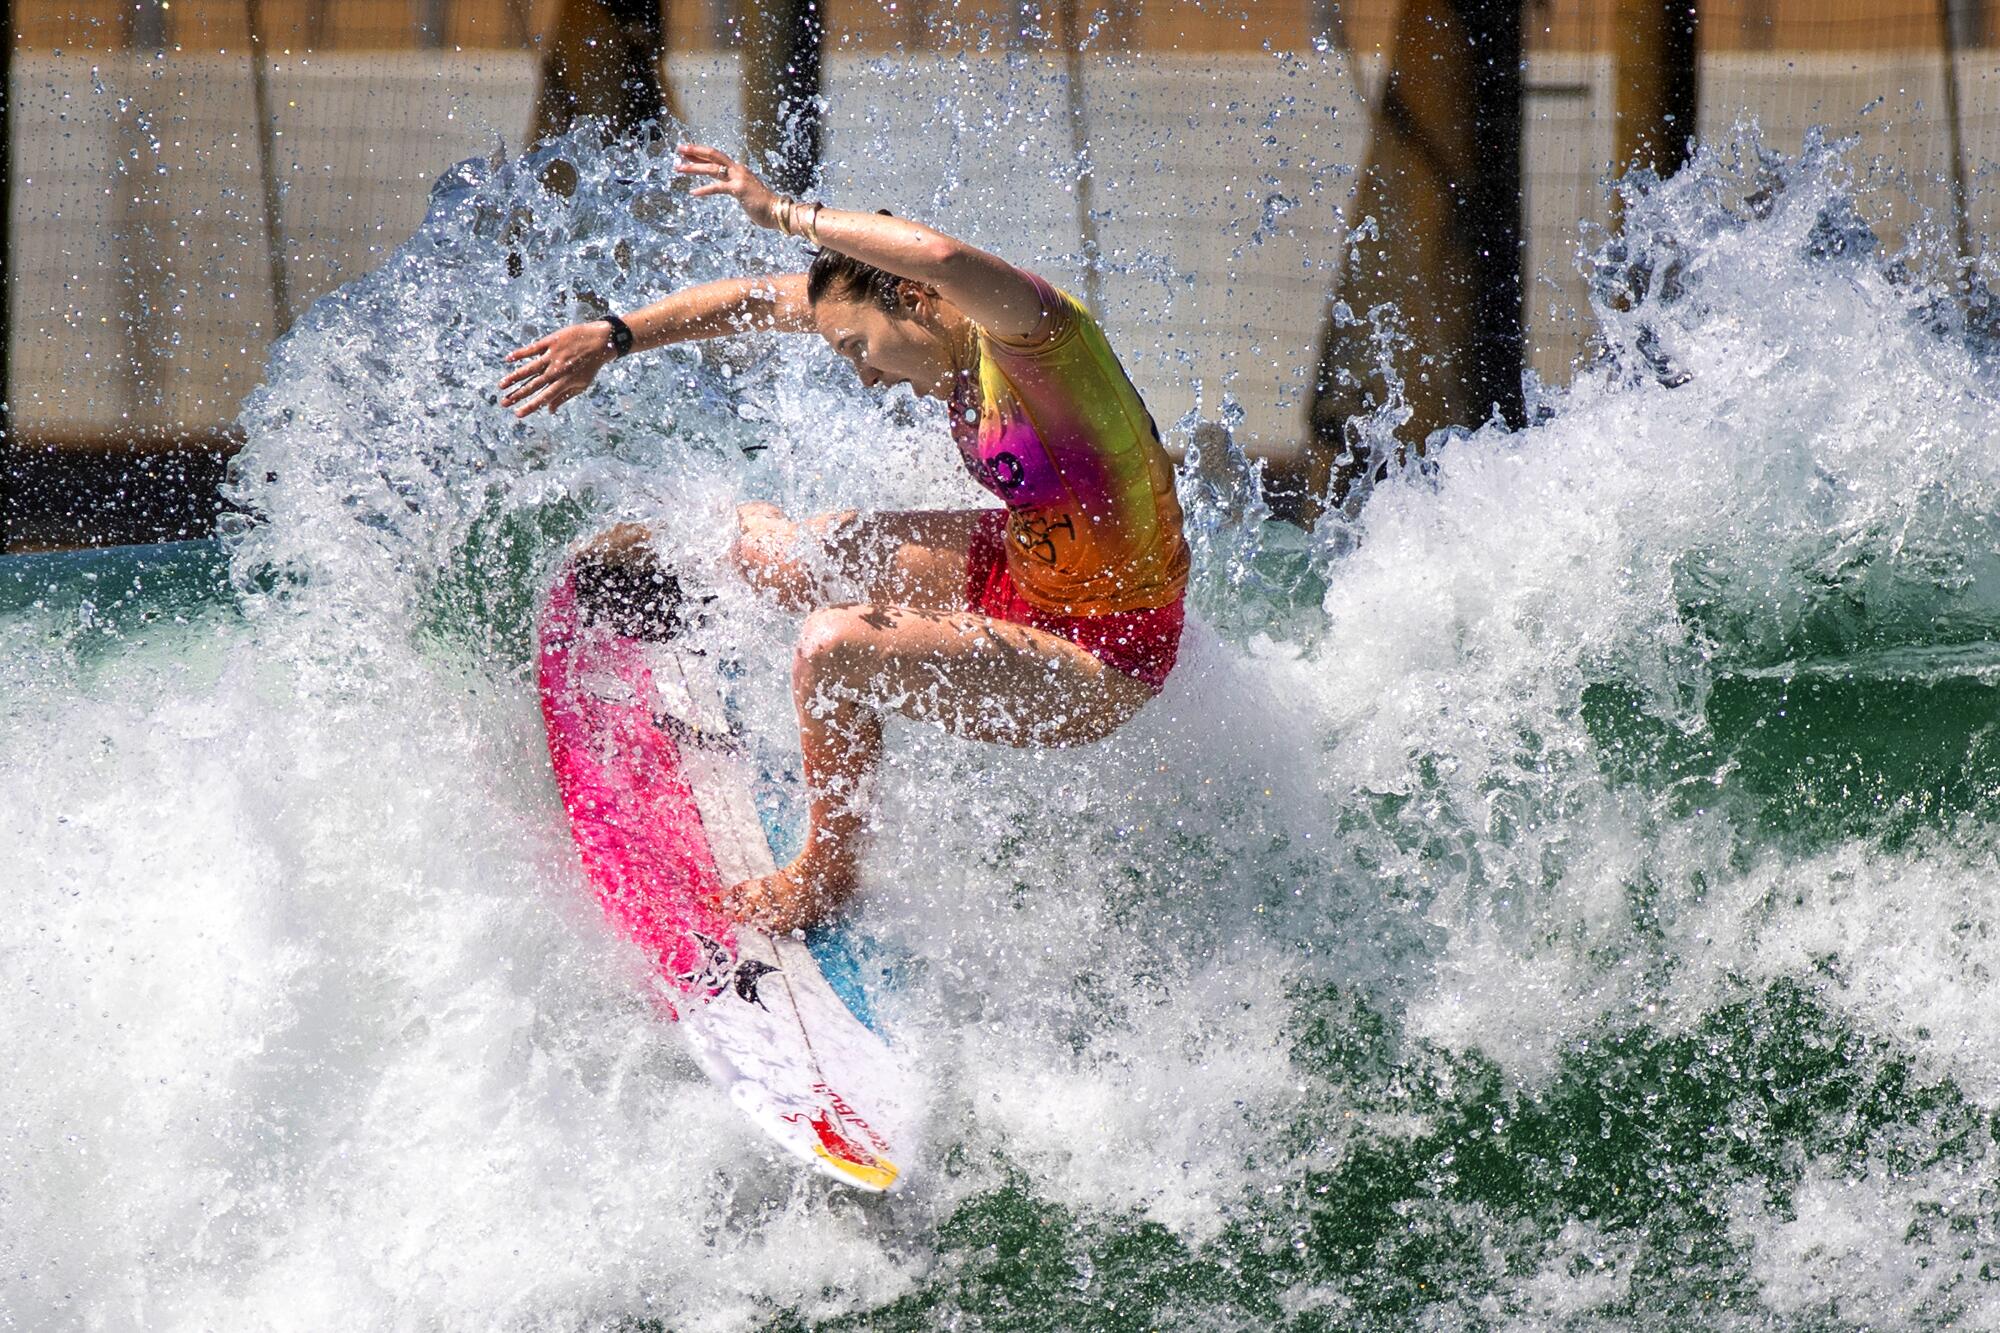 Carissa Moore of Hawaii competes at the Jeep Surf Ranch Pro at the Kelly Slater WSL Surf Ranch in Lemoore, Calif.